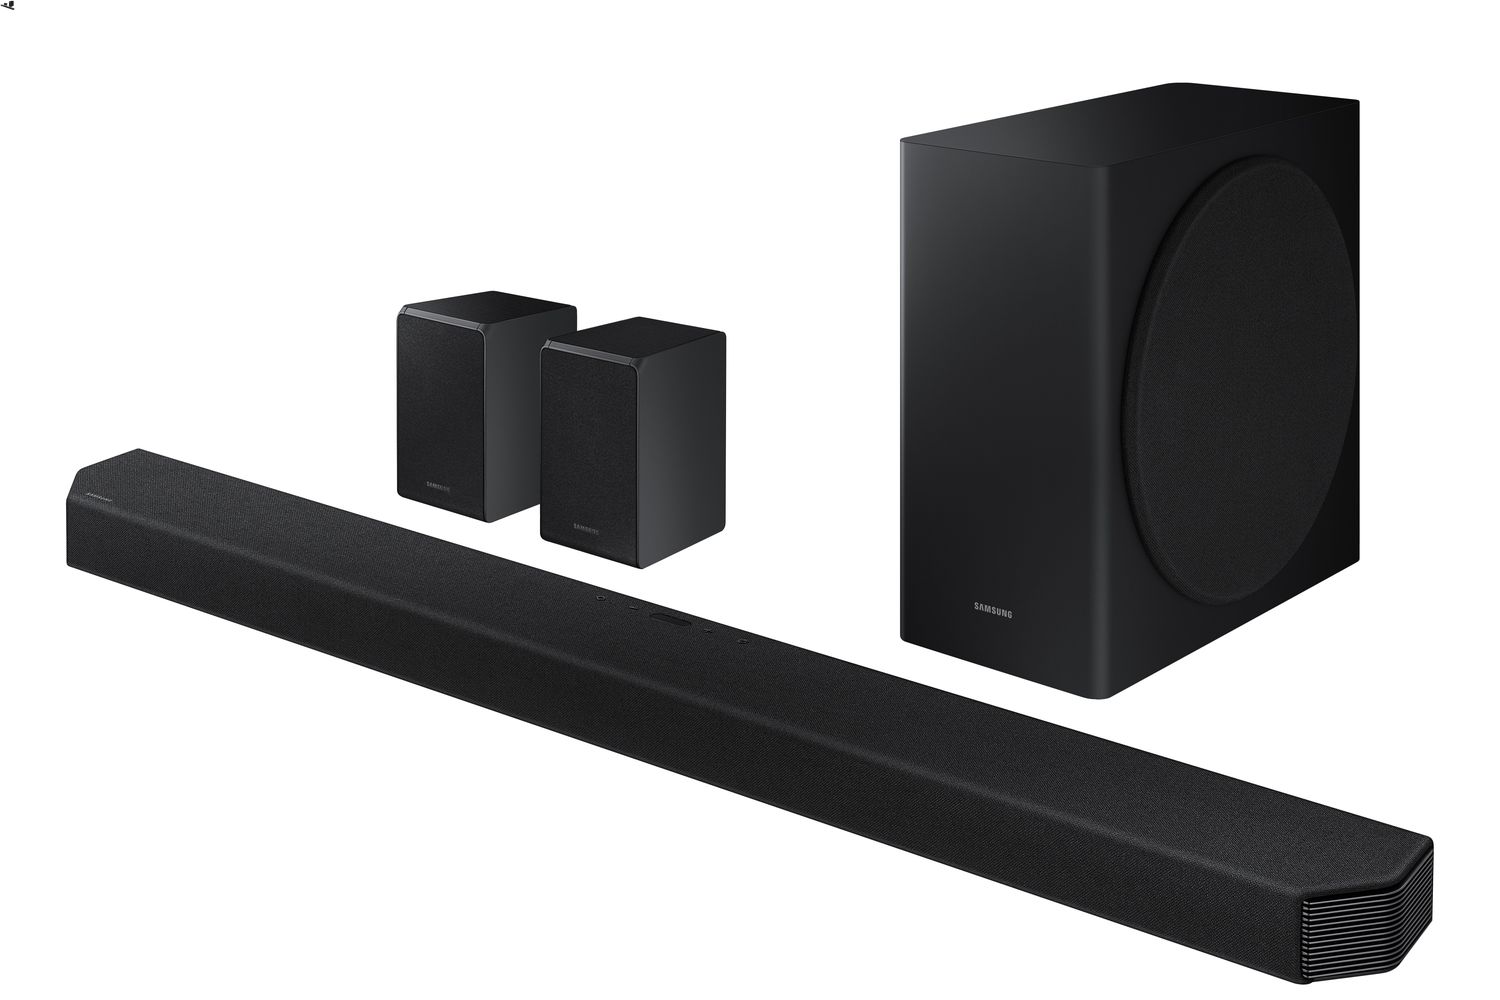 How To Add Speakers To Samsung Sound Bar